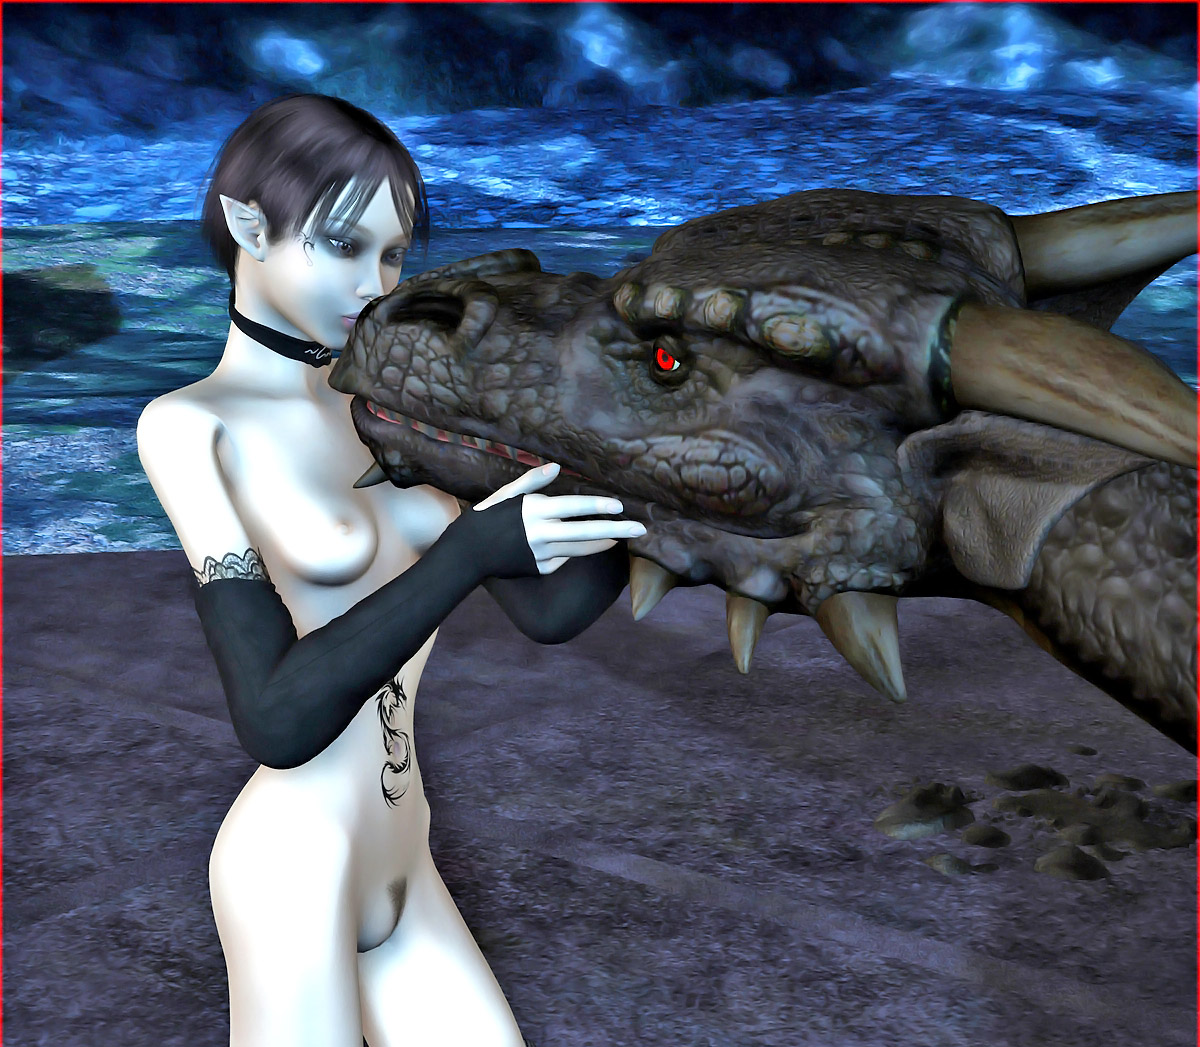 Horny dragon rider playing with her dragon's huge cock at 3dEvilMonsters